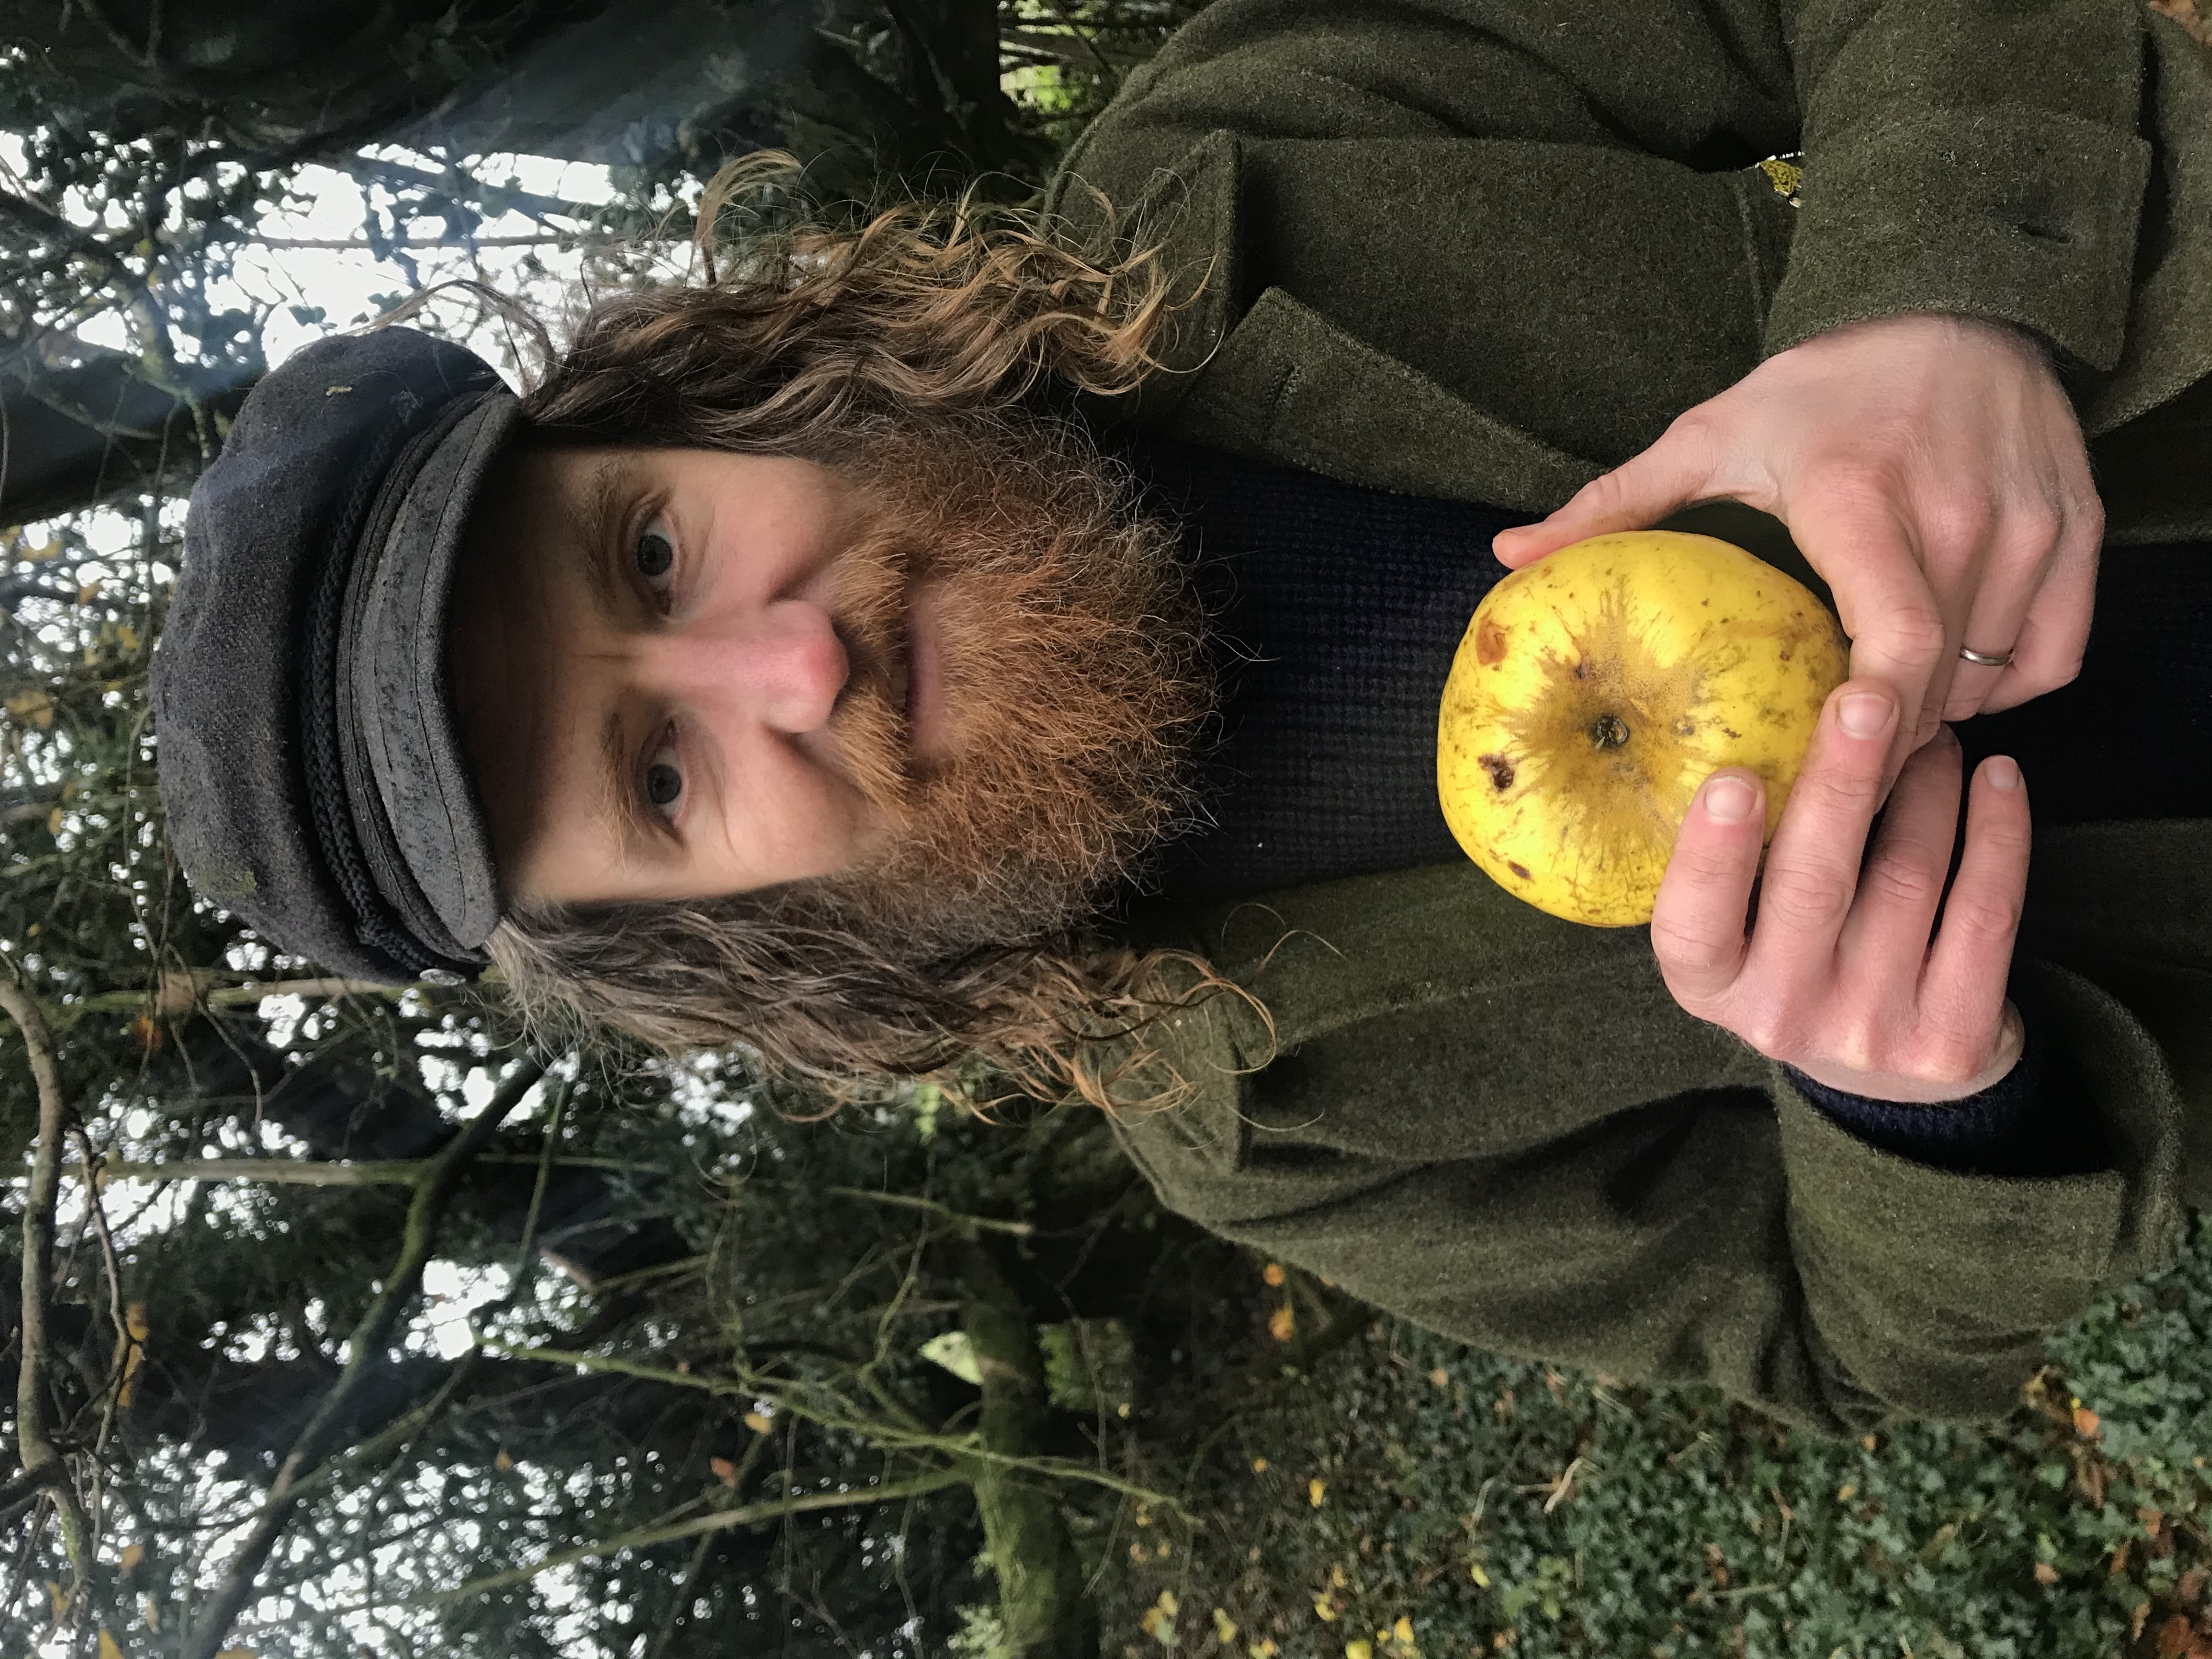 Archie Thomas holding his apple find in woodlands near his home (Hannah Thomas/PA)